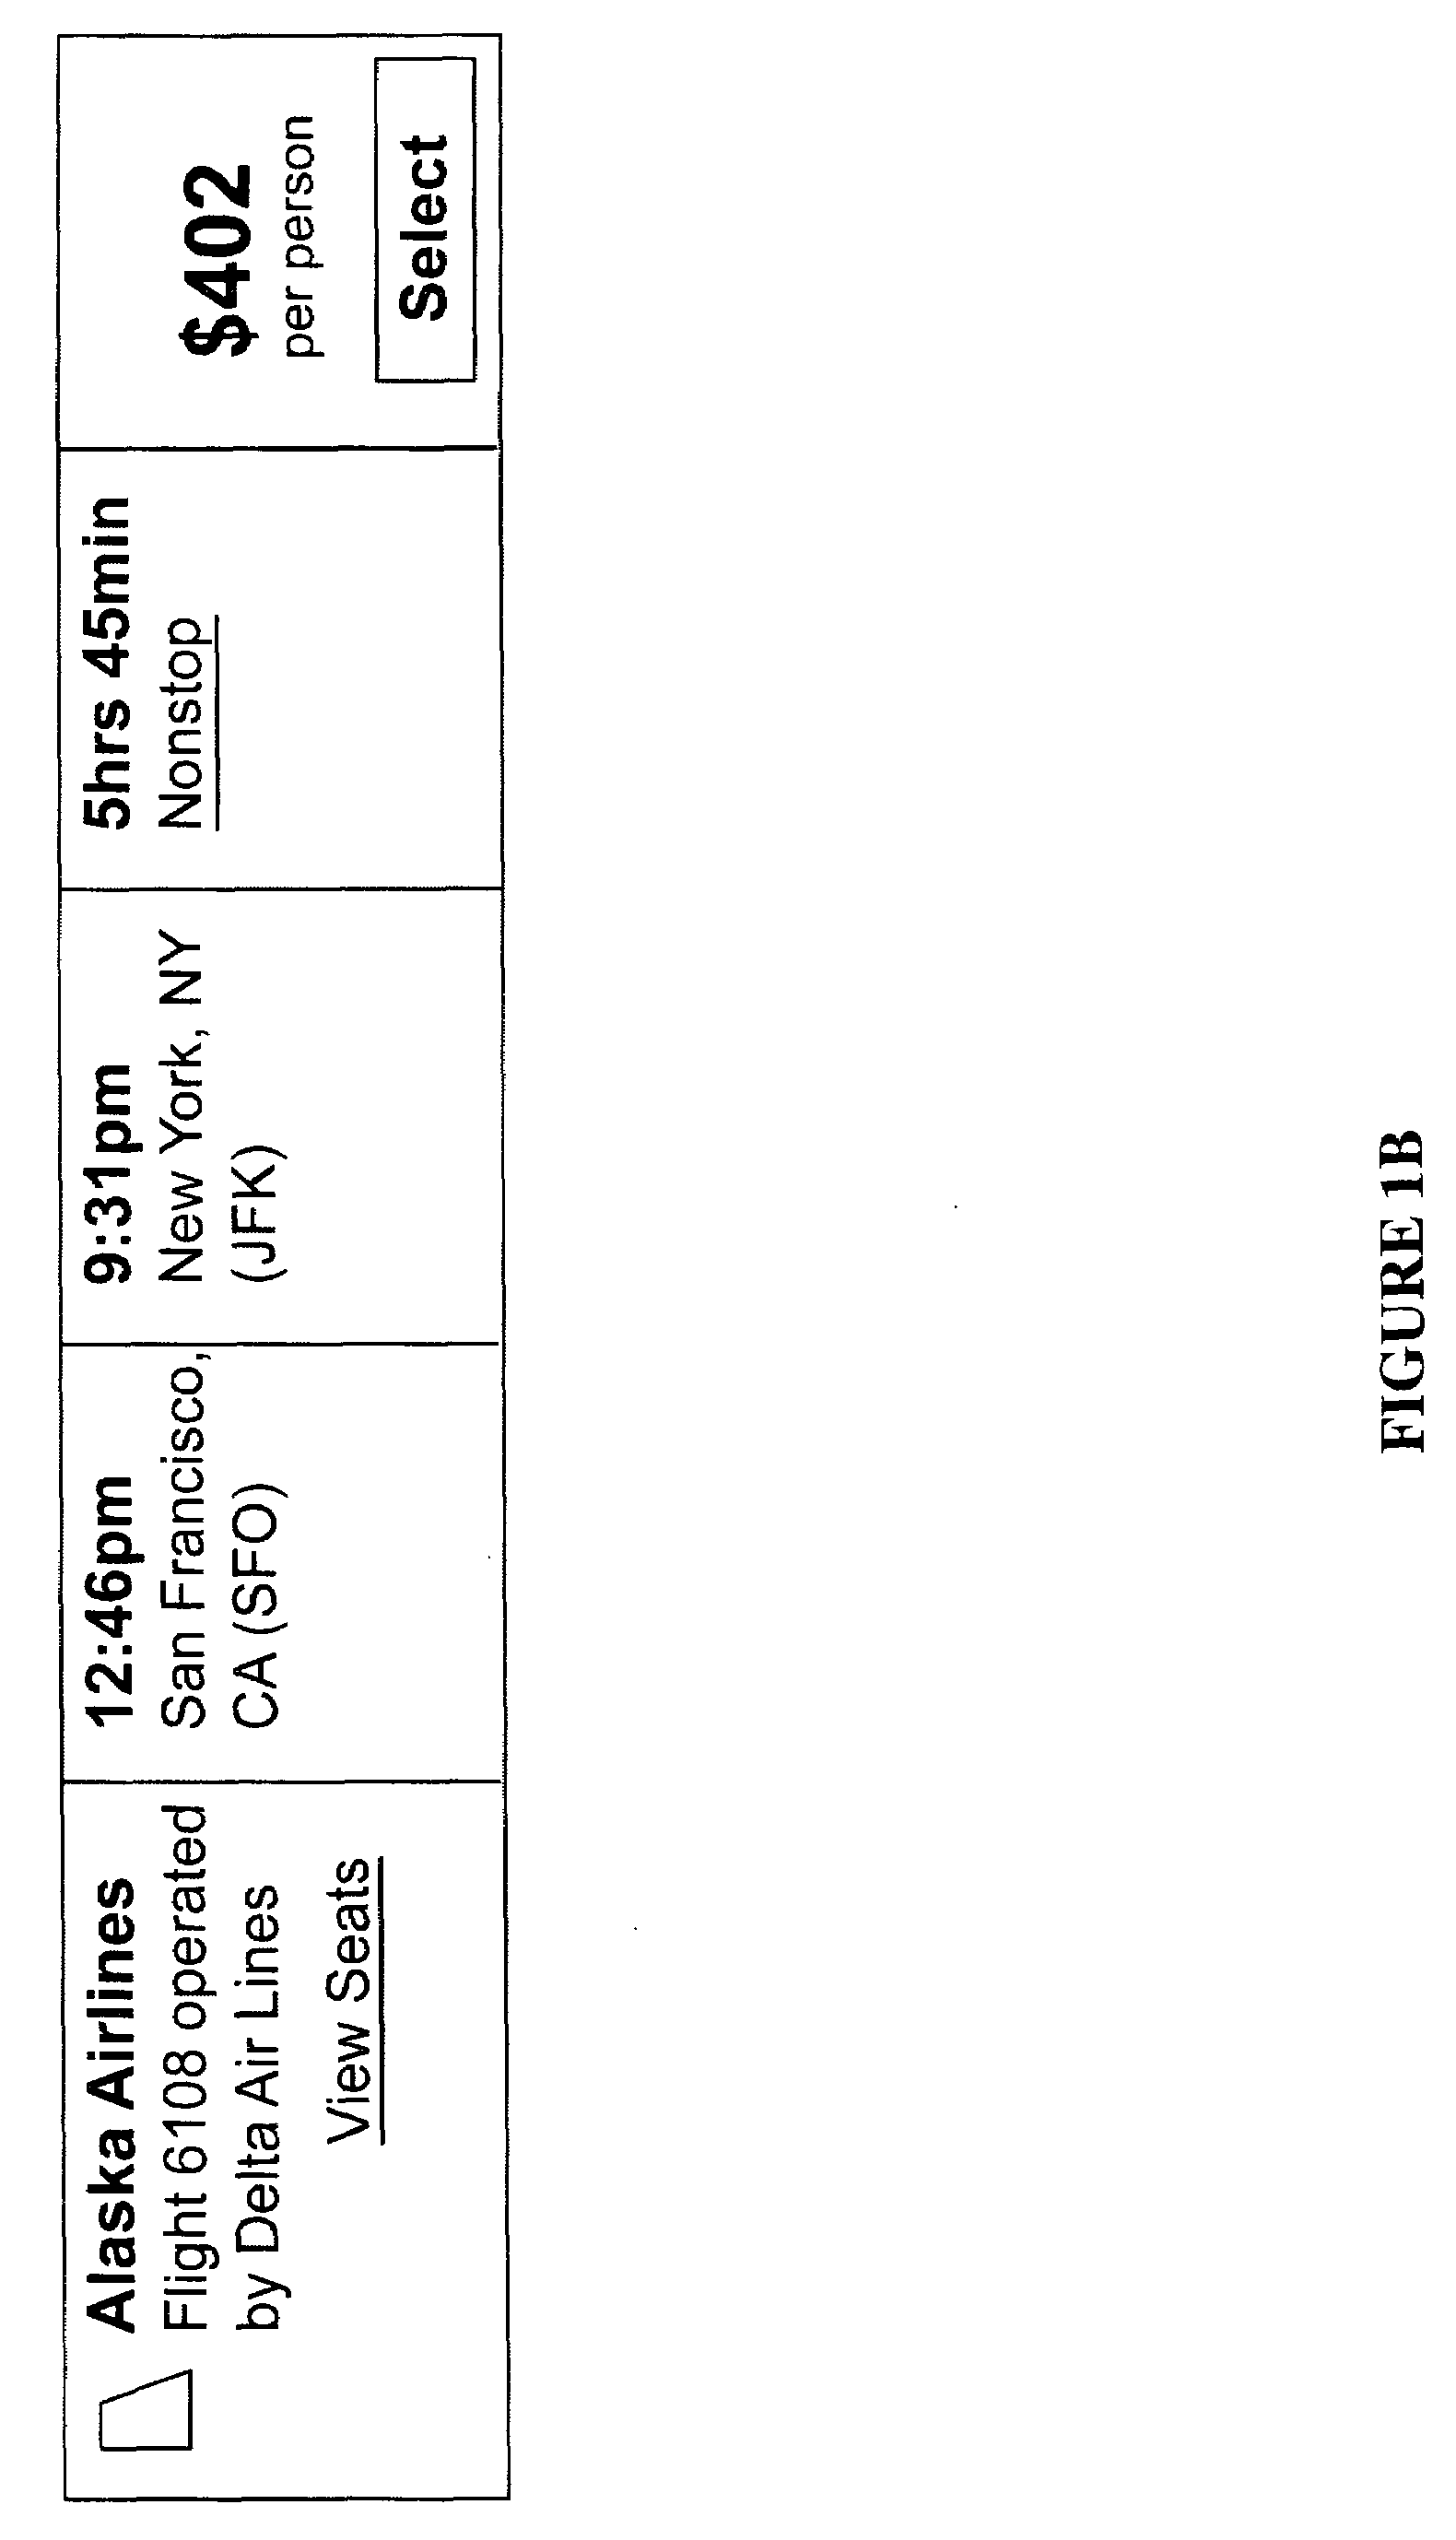 Architecture and system for displaying schedule and route information